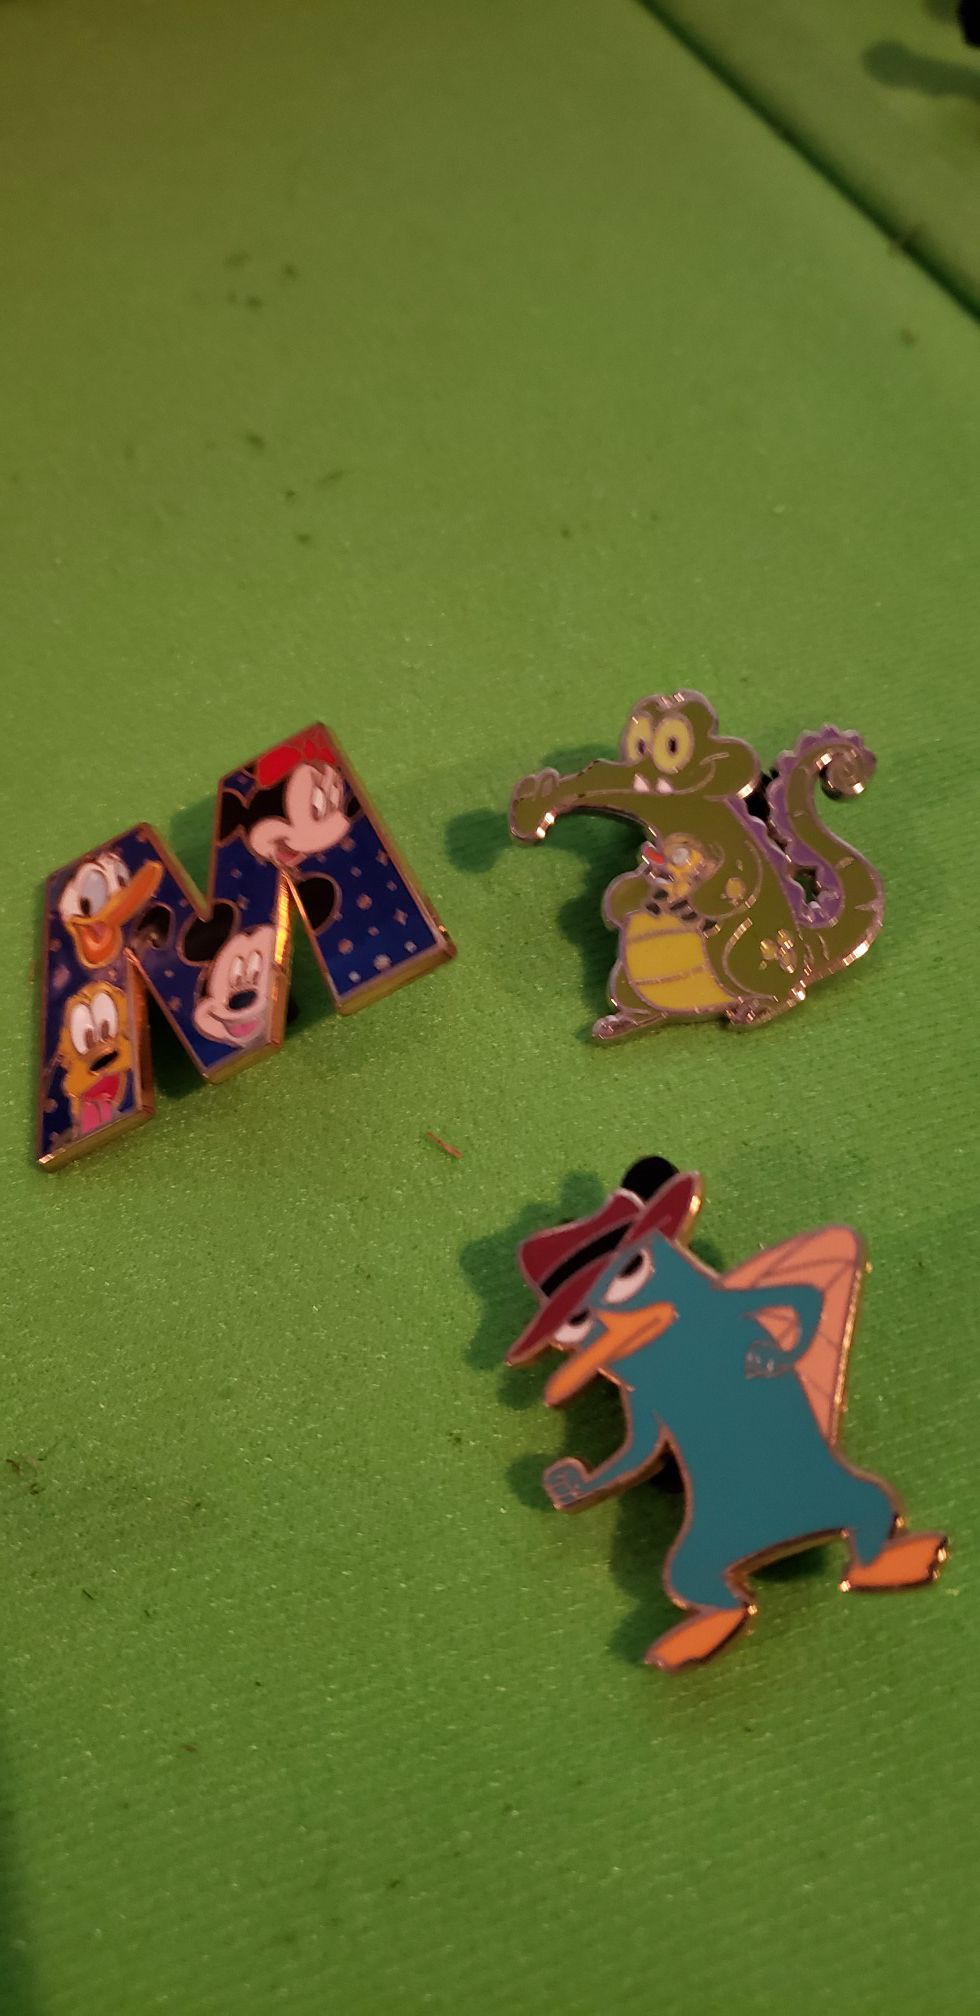 Lot of 3 Disney pins for $10